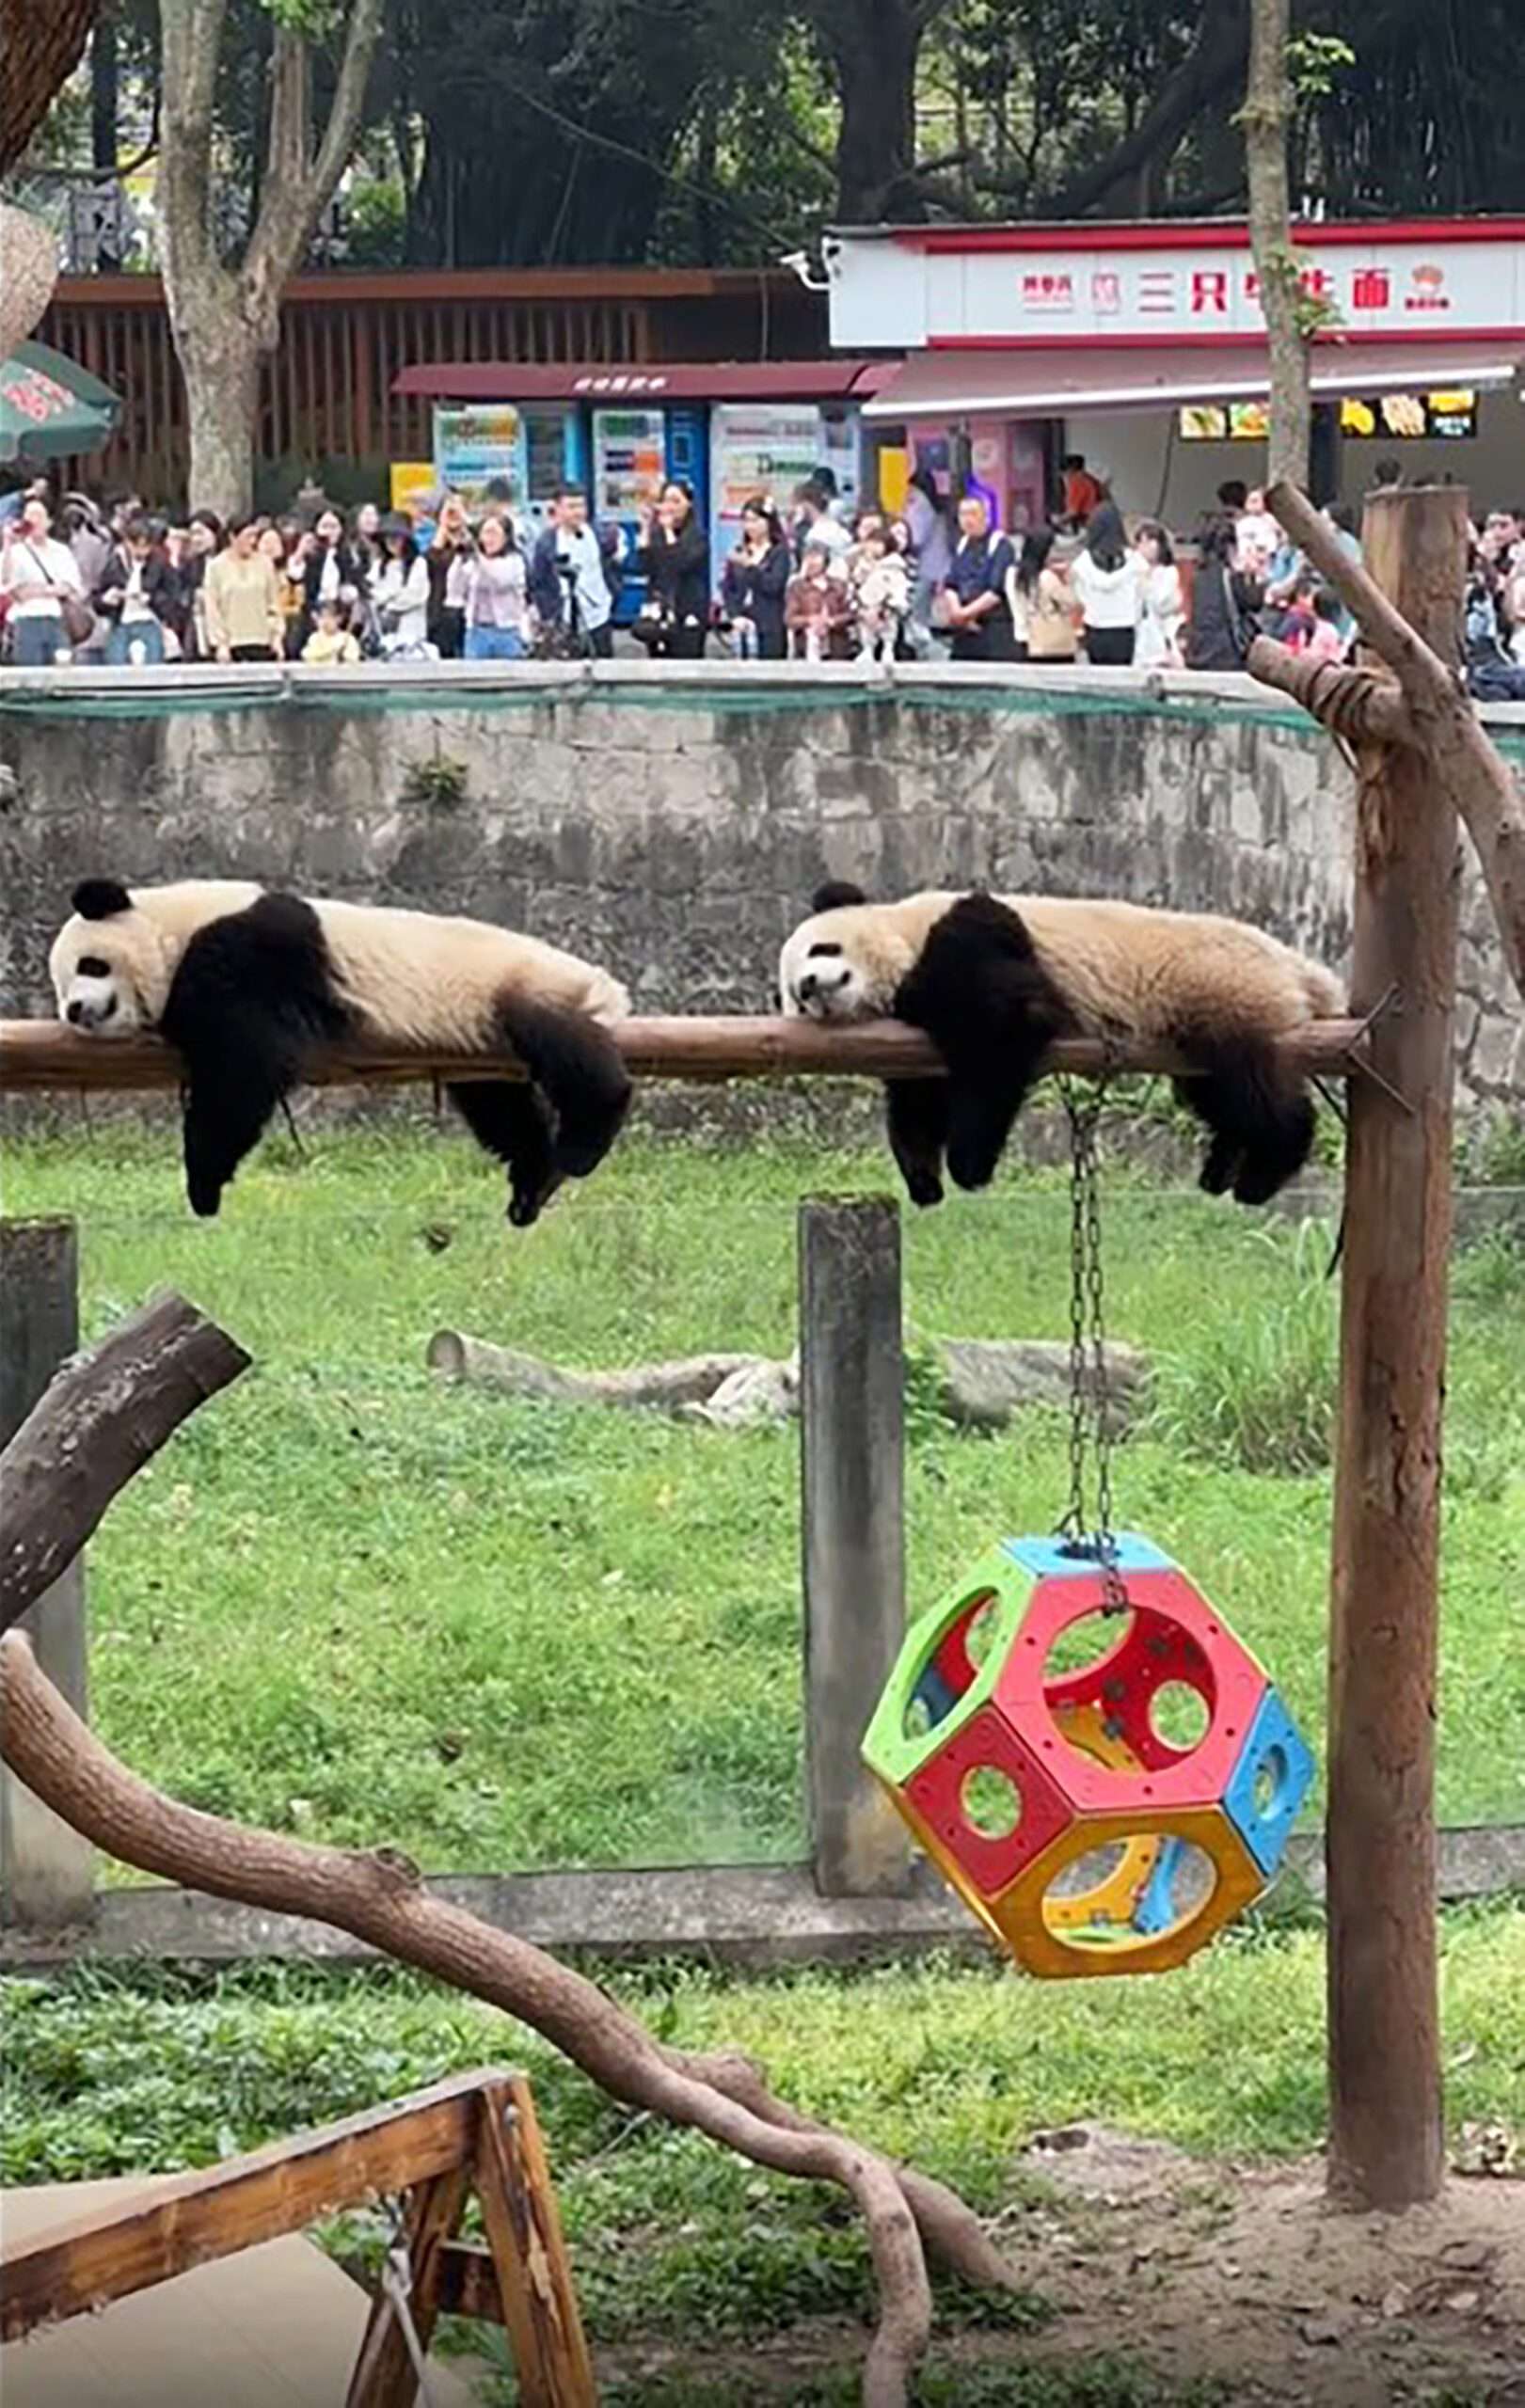 Read more about the article Cute Pandas Look Like Copy Paste Images Of Each Other As They Doze on Pole